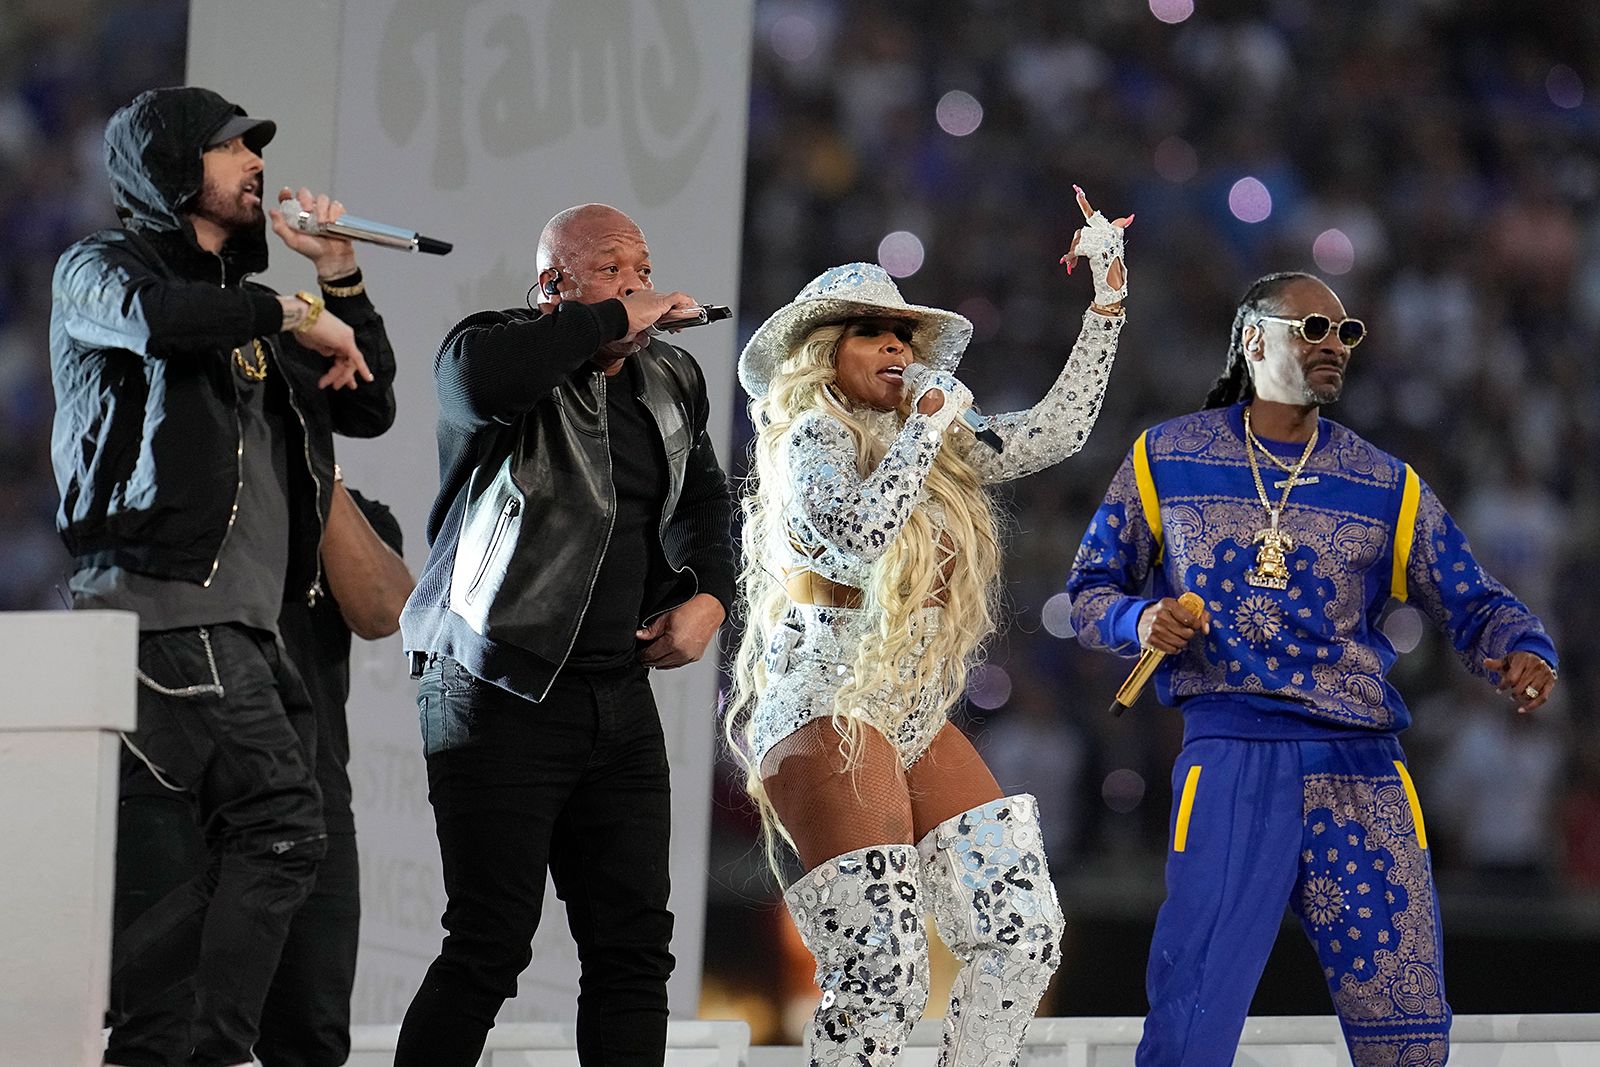 Mary J Blige's jaw-dropping sequin outfit 'won' Super Bowl half